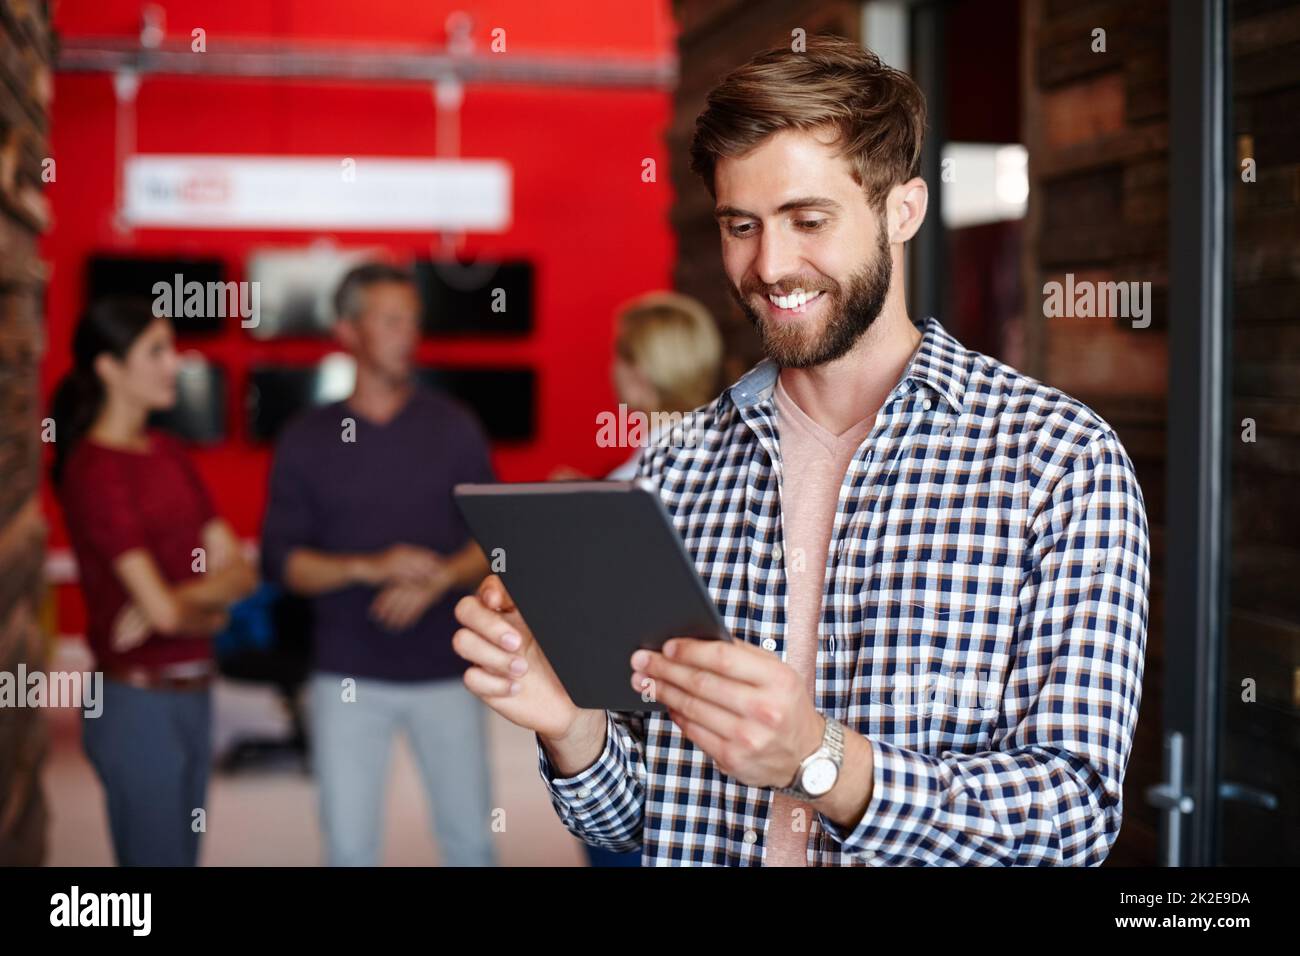 Enjoying his new work tool. Shot of a young designer using a tablet with her colleagues standing in the background. Stock Photo